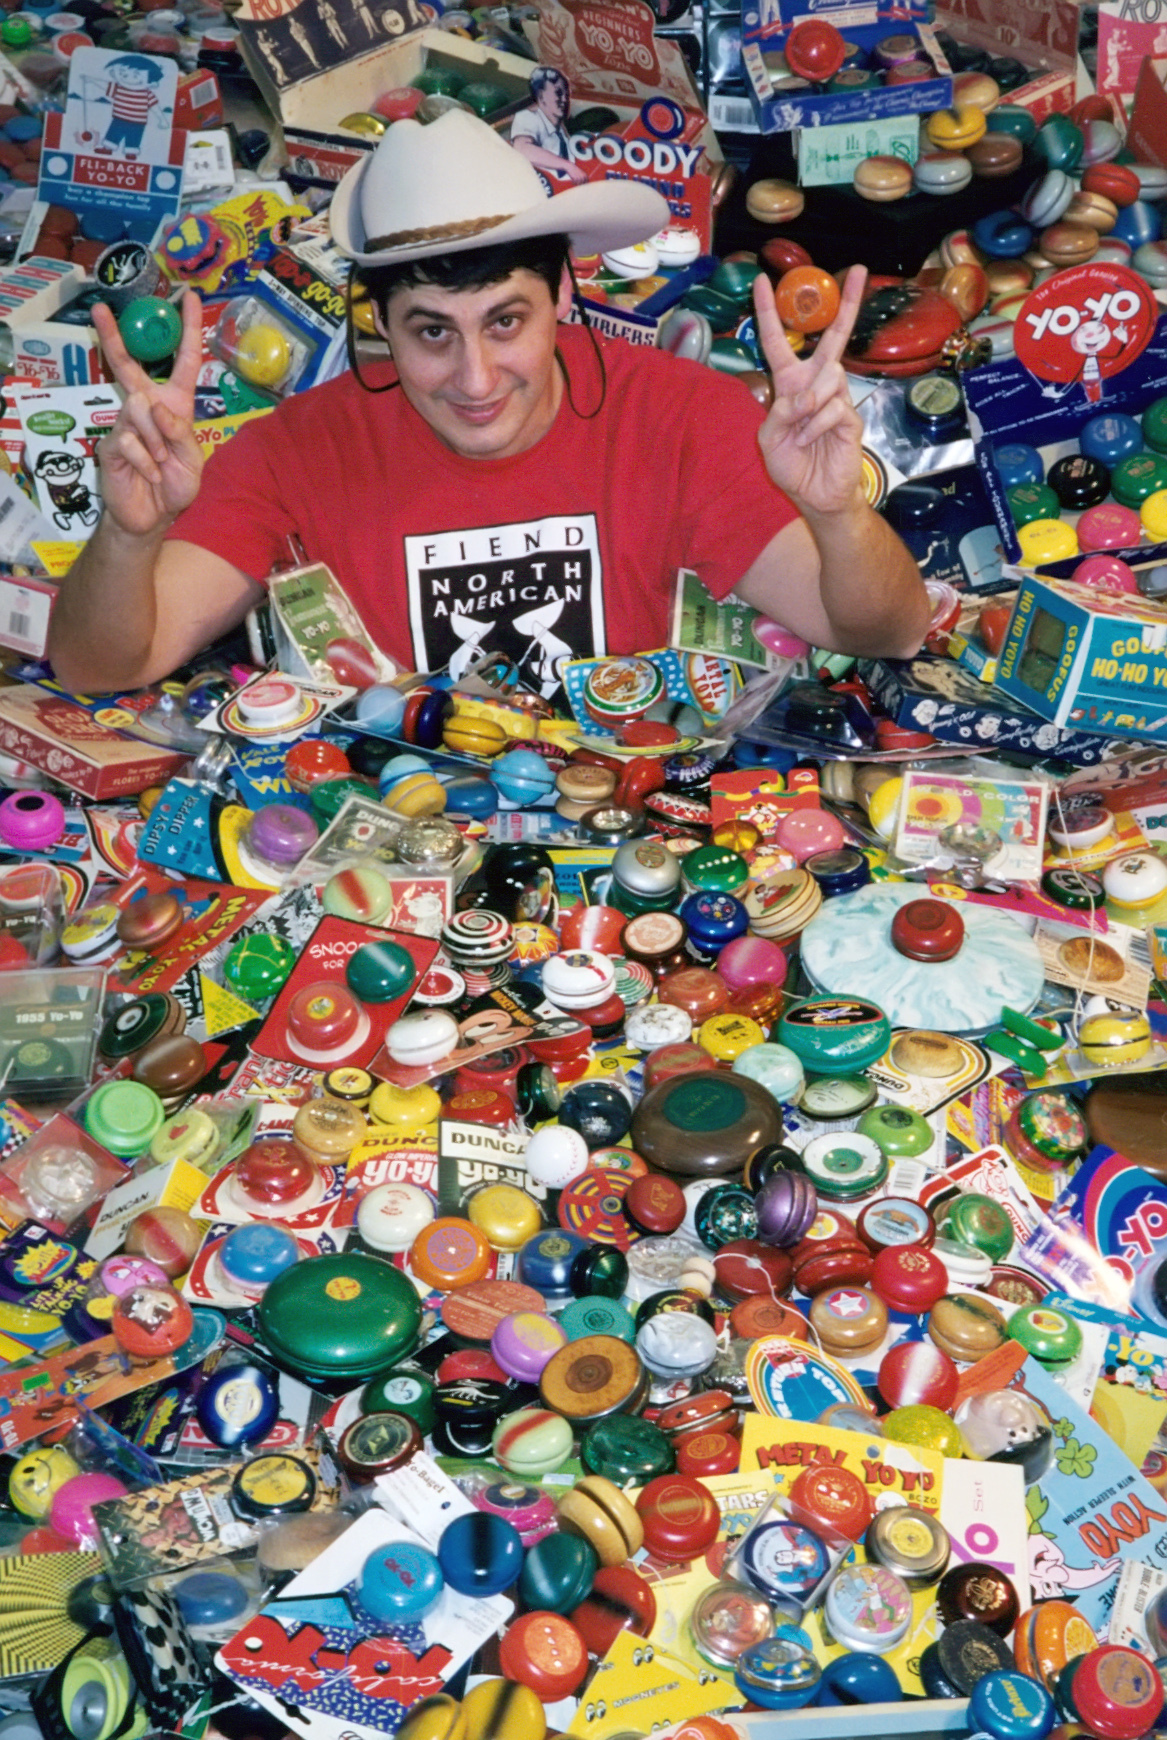 This photo of Lucky and his yo-yos was used in promotions for the Guinness Book of World Records. At one point, it was even made into a trading card.